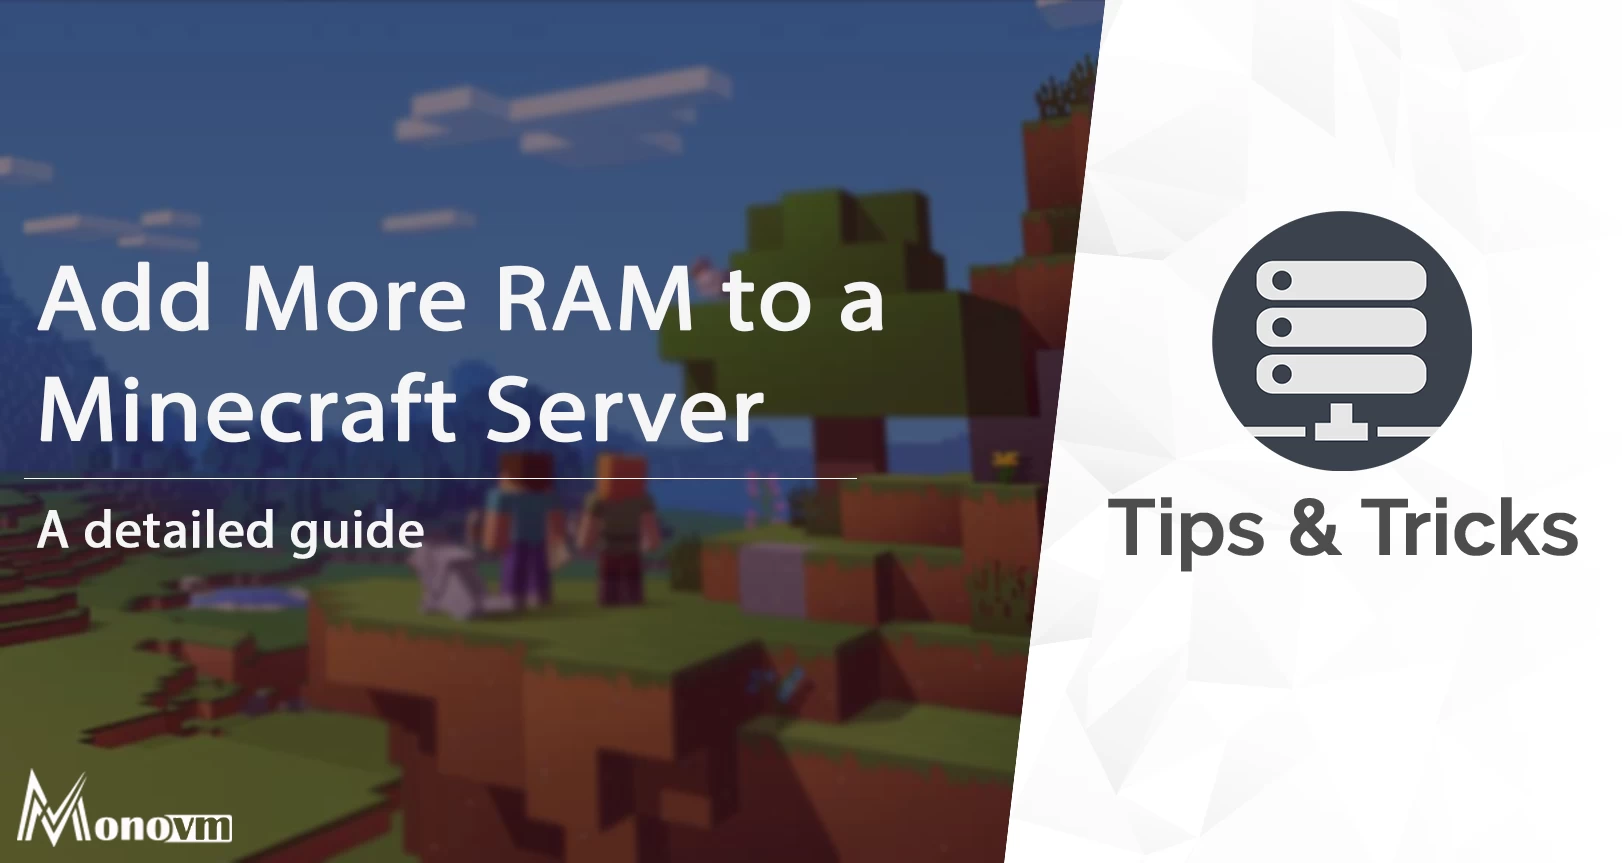 How to Add More RAM to the Minecraft Server